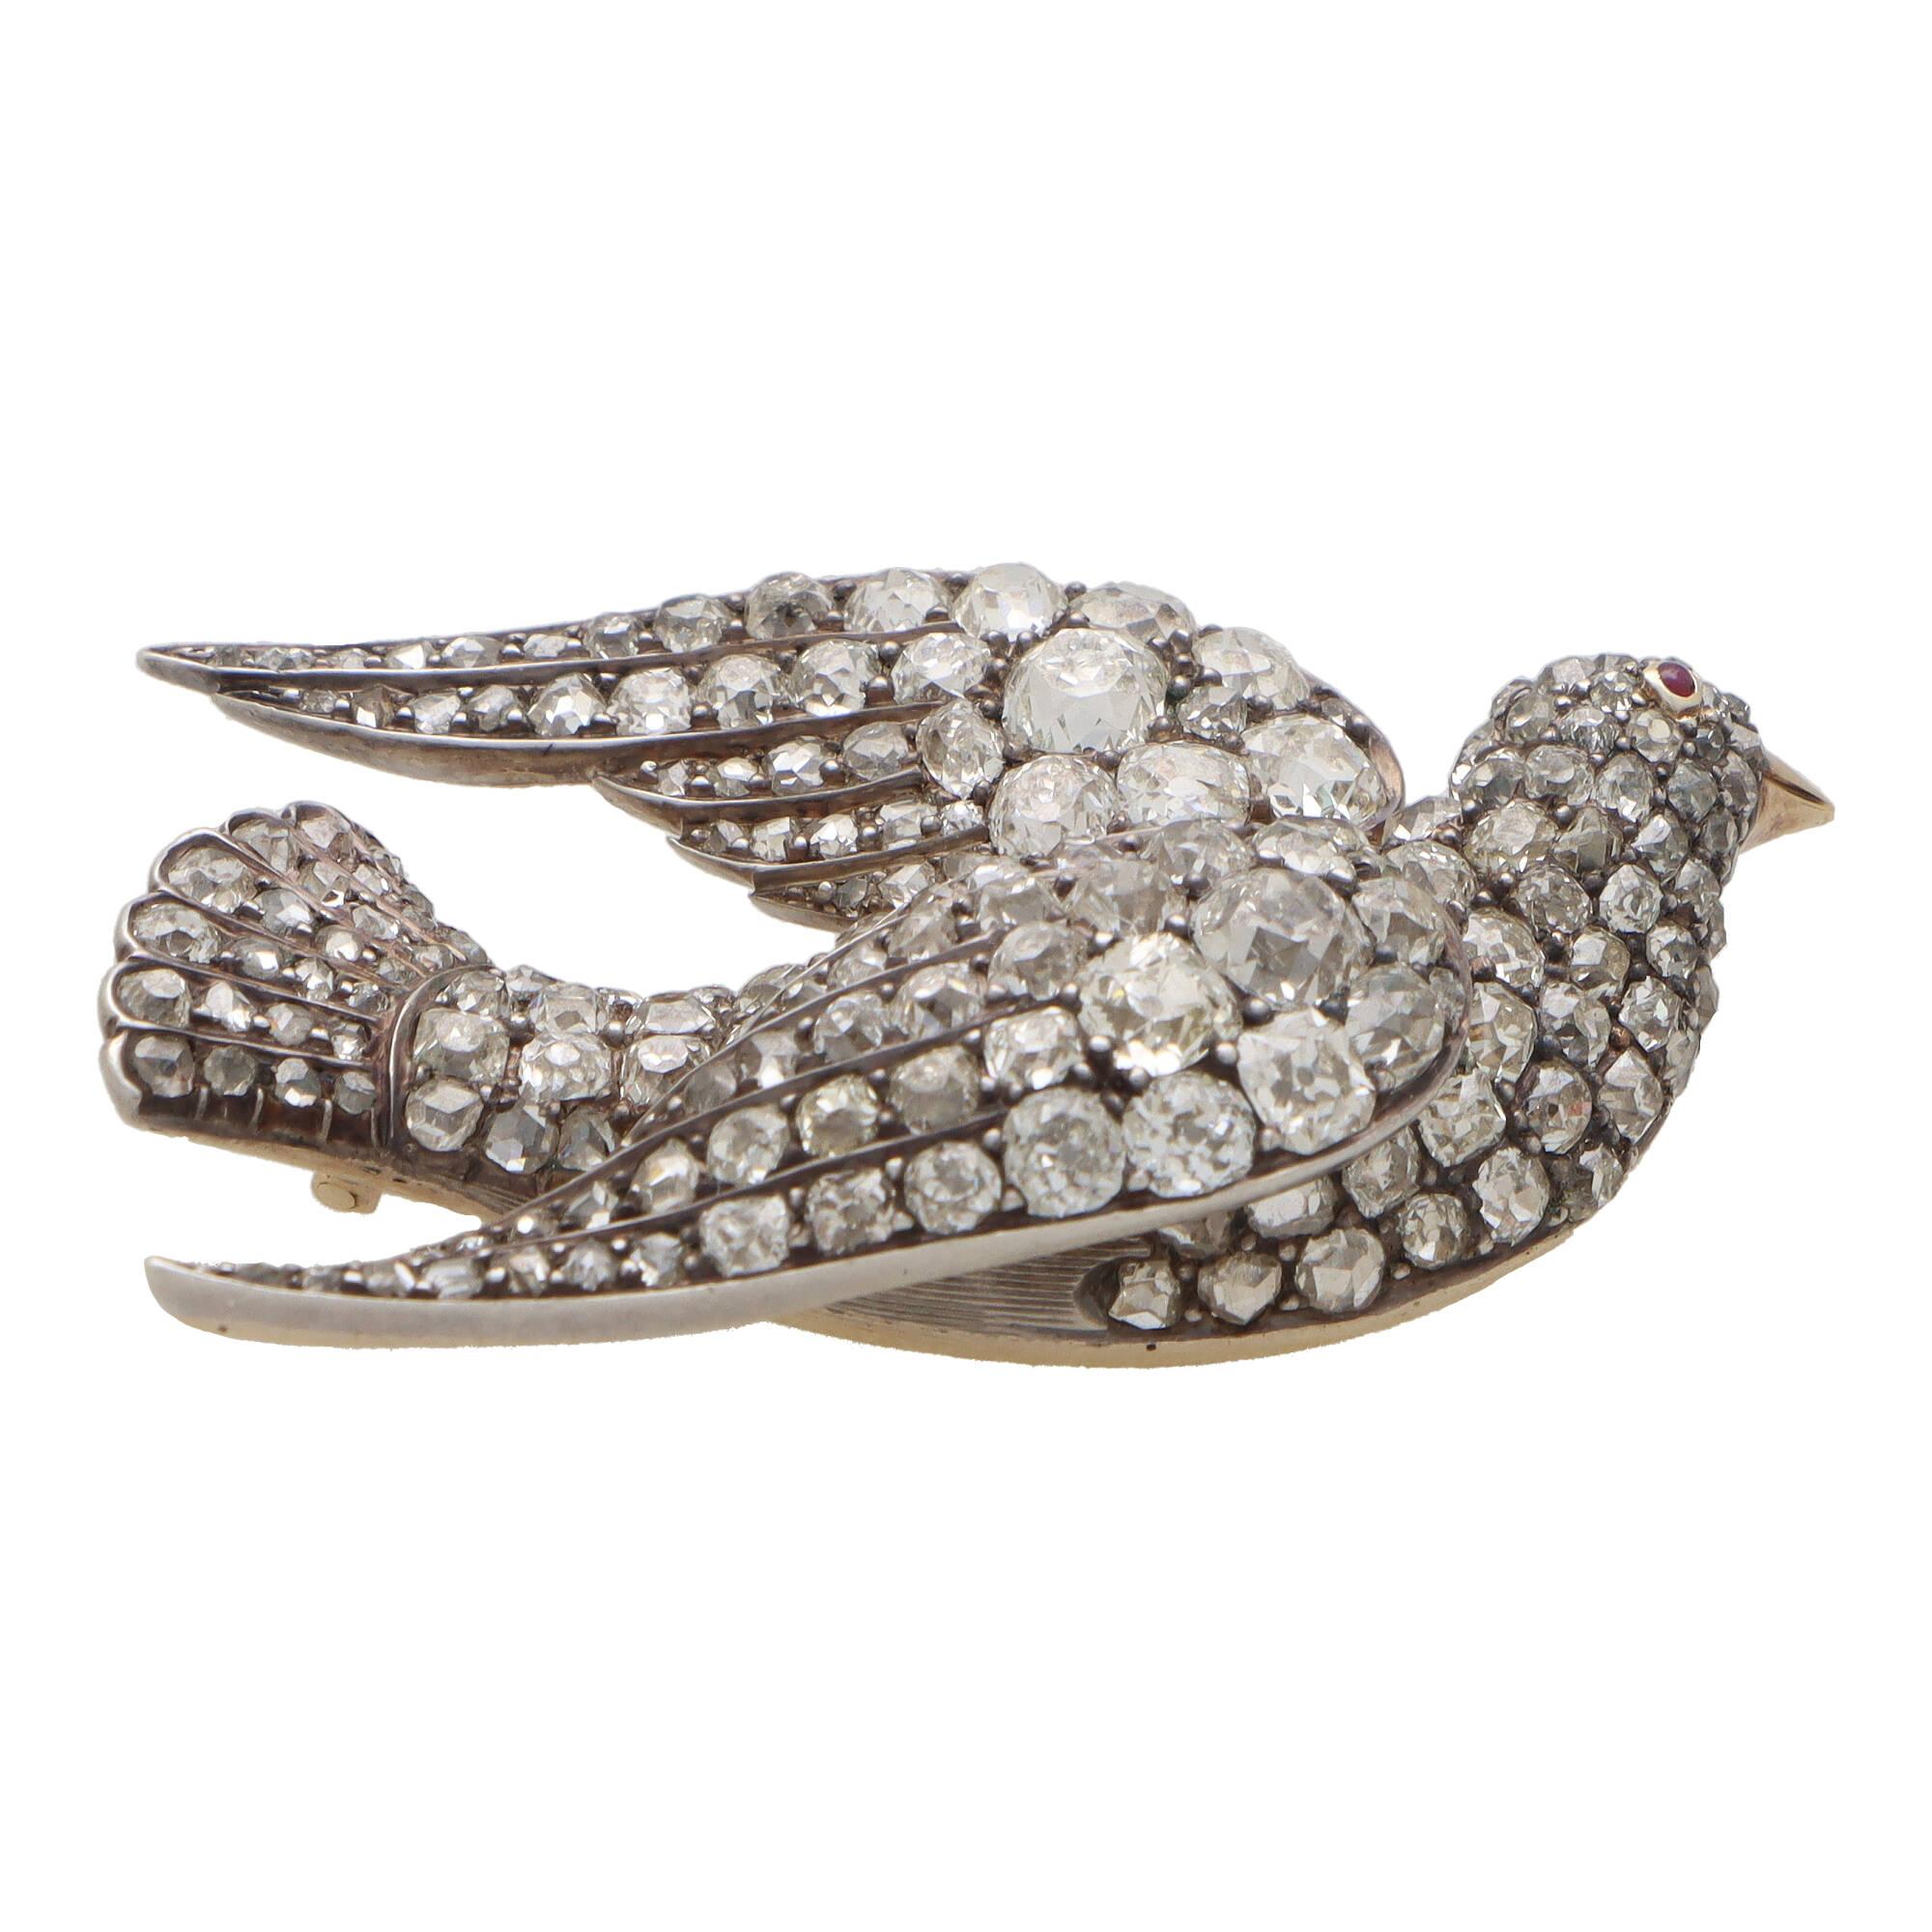 A beautiful Late Victorian old cut diamond bird brooch set in silver on gold.

The brooch depicts a flying bird set throughout with a mixture of rose cut, single cut and old cut diamonds. The piece has been cleverly crafted and designed so that each